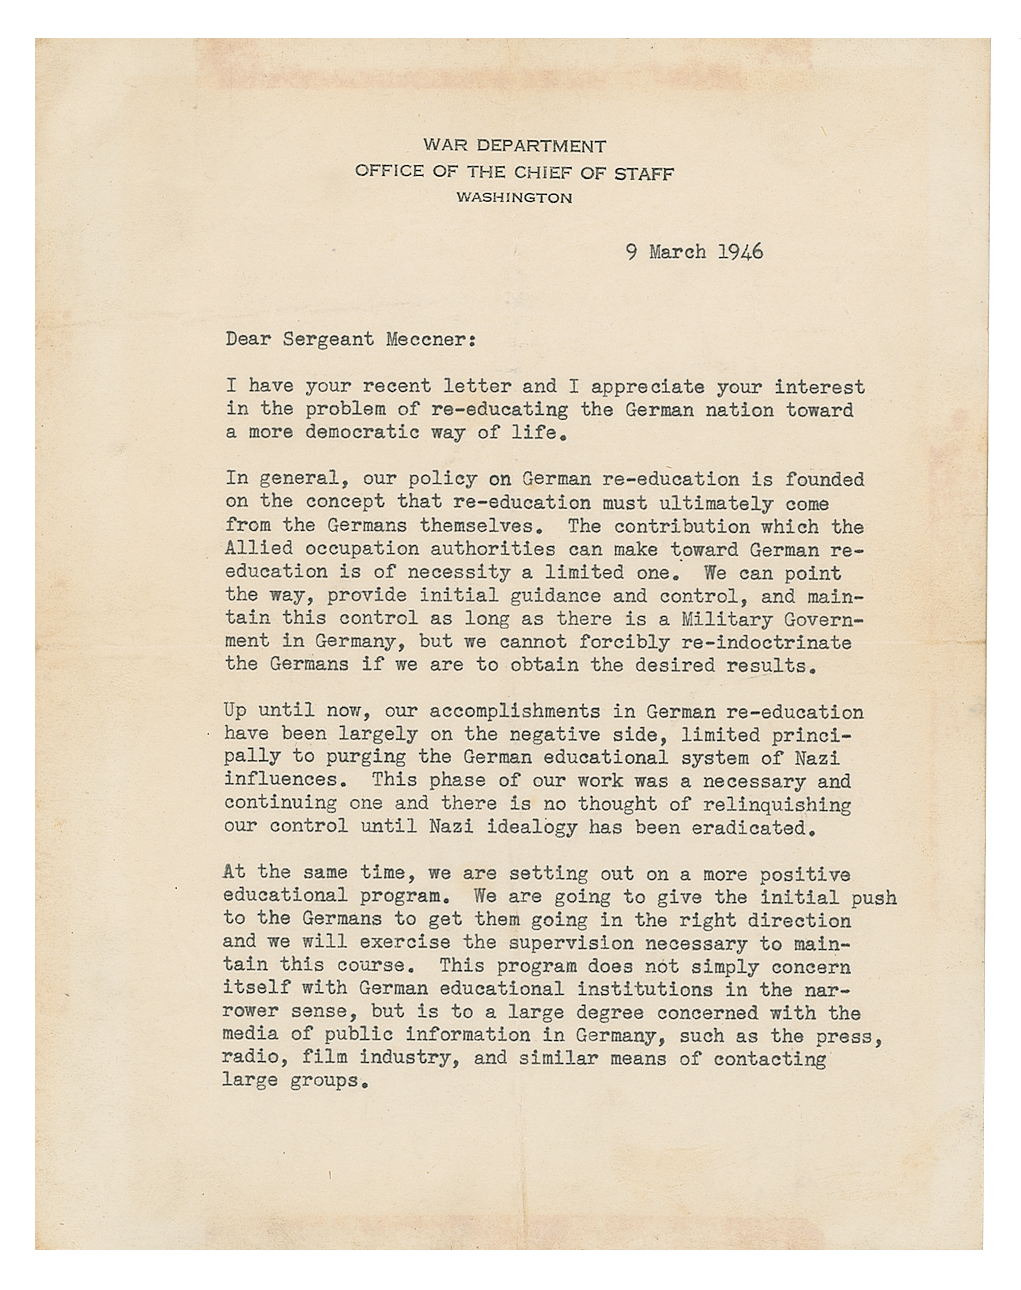 Lot #28 Dwight D. Eisenhower Typed Letter Signed on Re-Educating Postwar Germany: "There is no thought of relinquishing our control until Nazi ideology has been eradicated" - Image 1